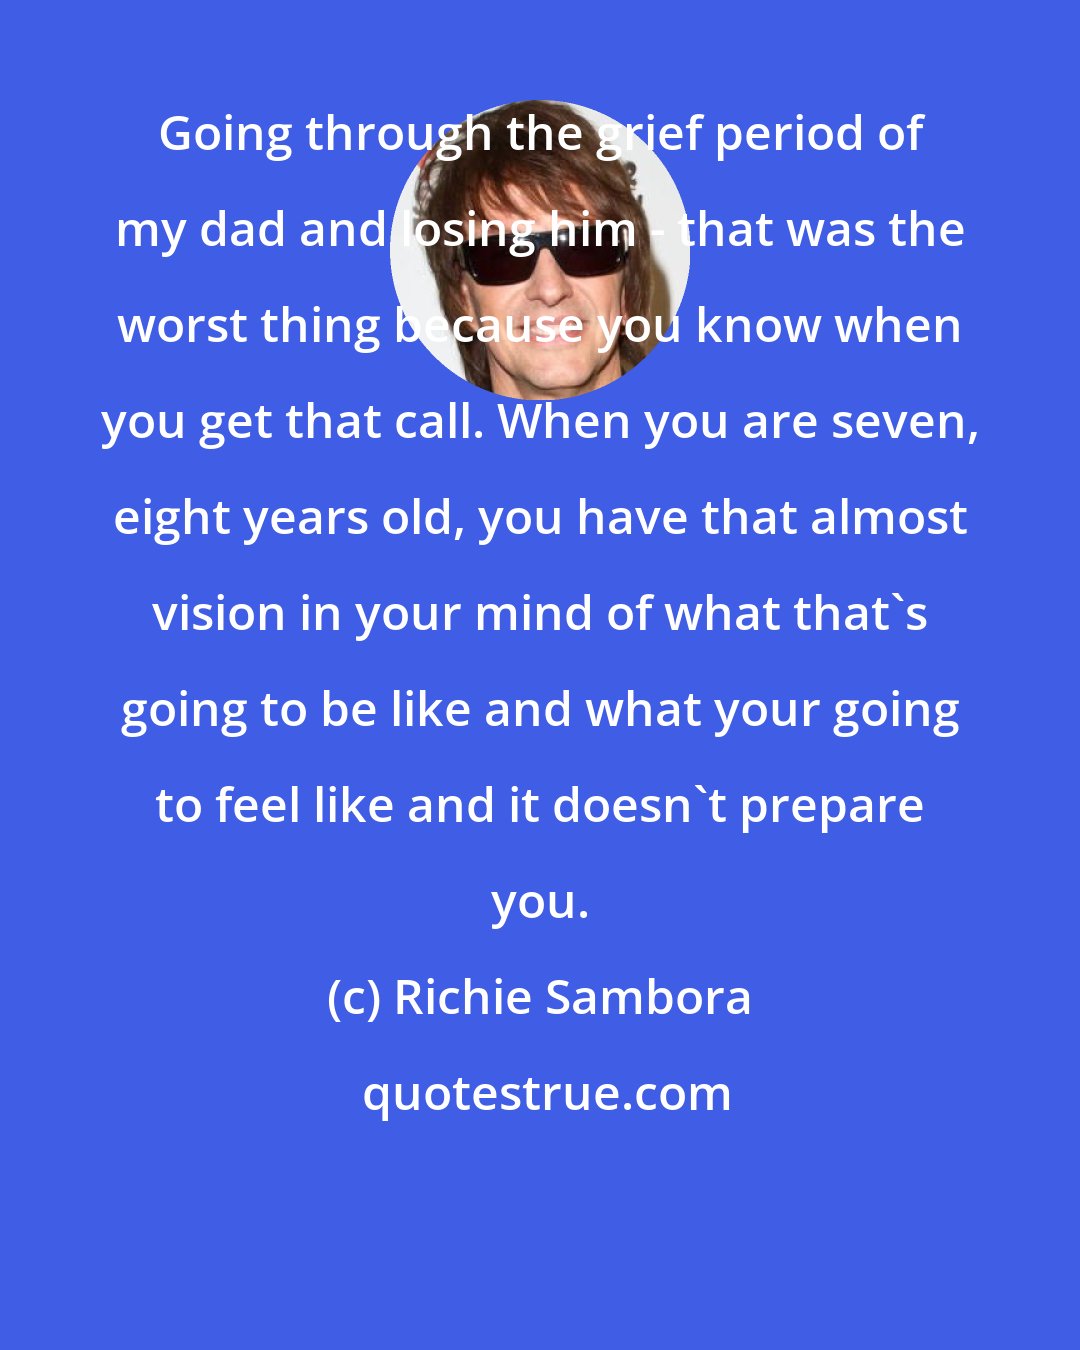 Richie Sambora: Going through the grief period of my dad and losing him - that was the worst thing because you know when you get that call. When you are seven, eight years old, you have that almost vision in your mind of what that's going to be like and what your going to feel like and it doesn't prepare you.